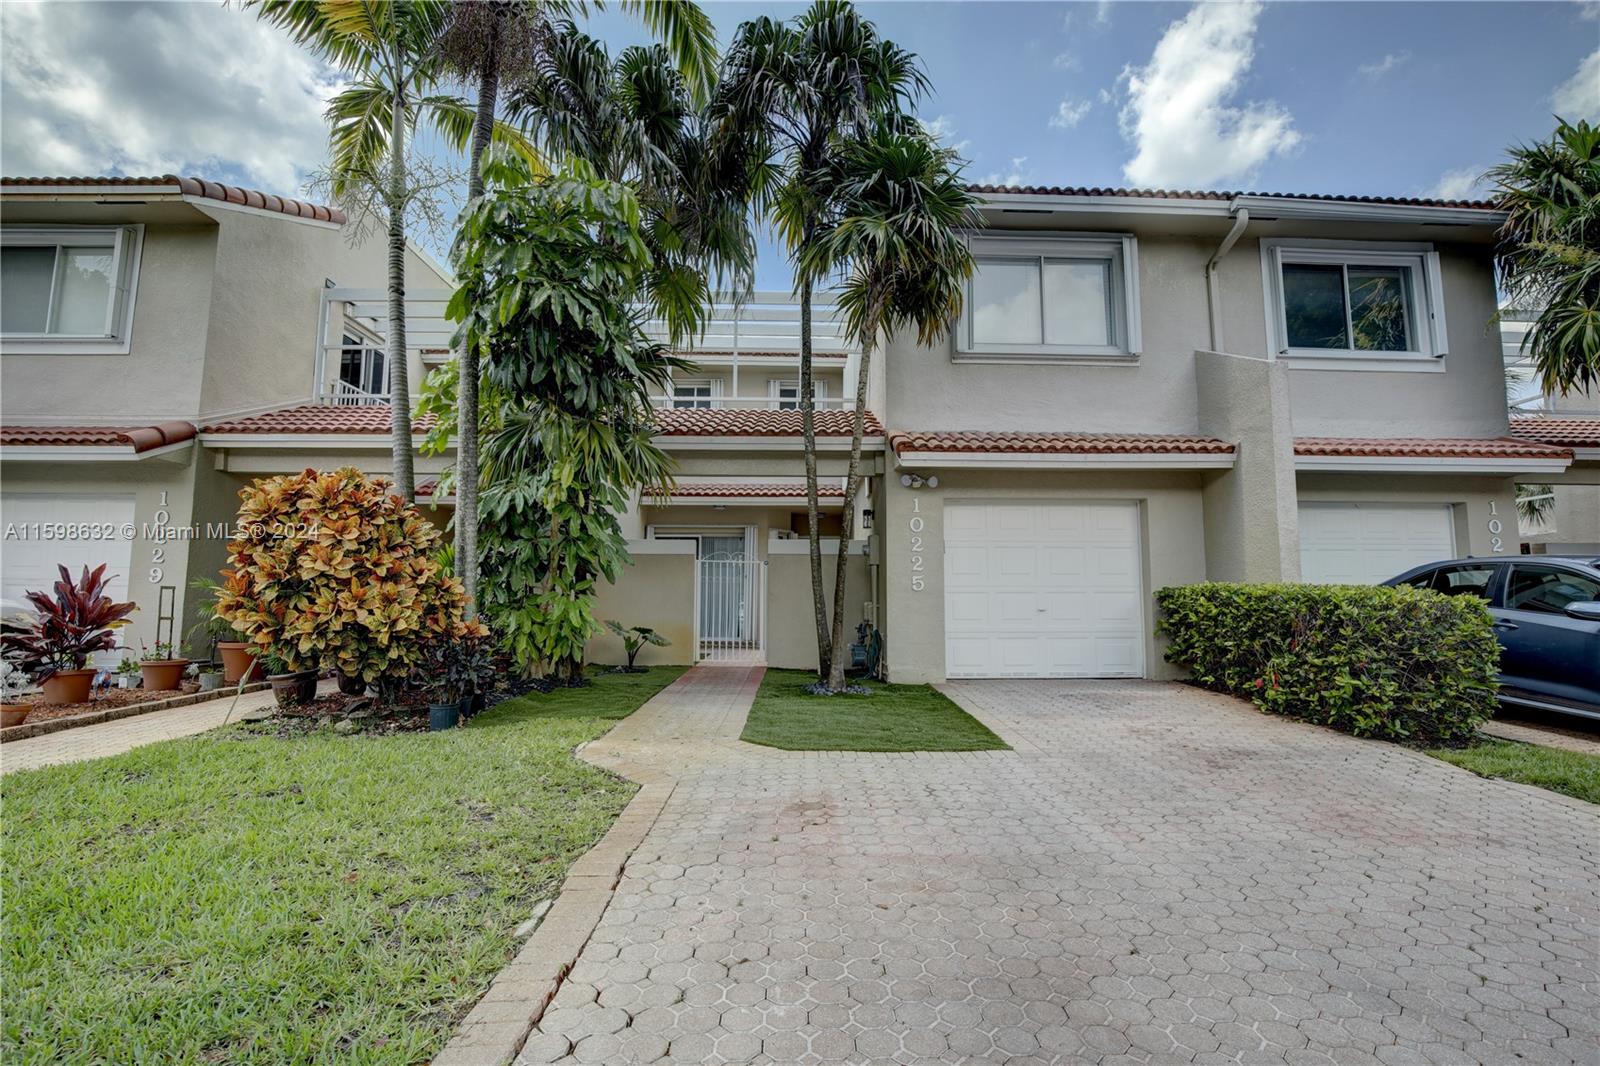 Address Not Disclosed, Doral, Miami-Dade County, Florida - 3 Bedrooms  
3 Bathrooms - 